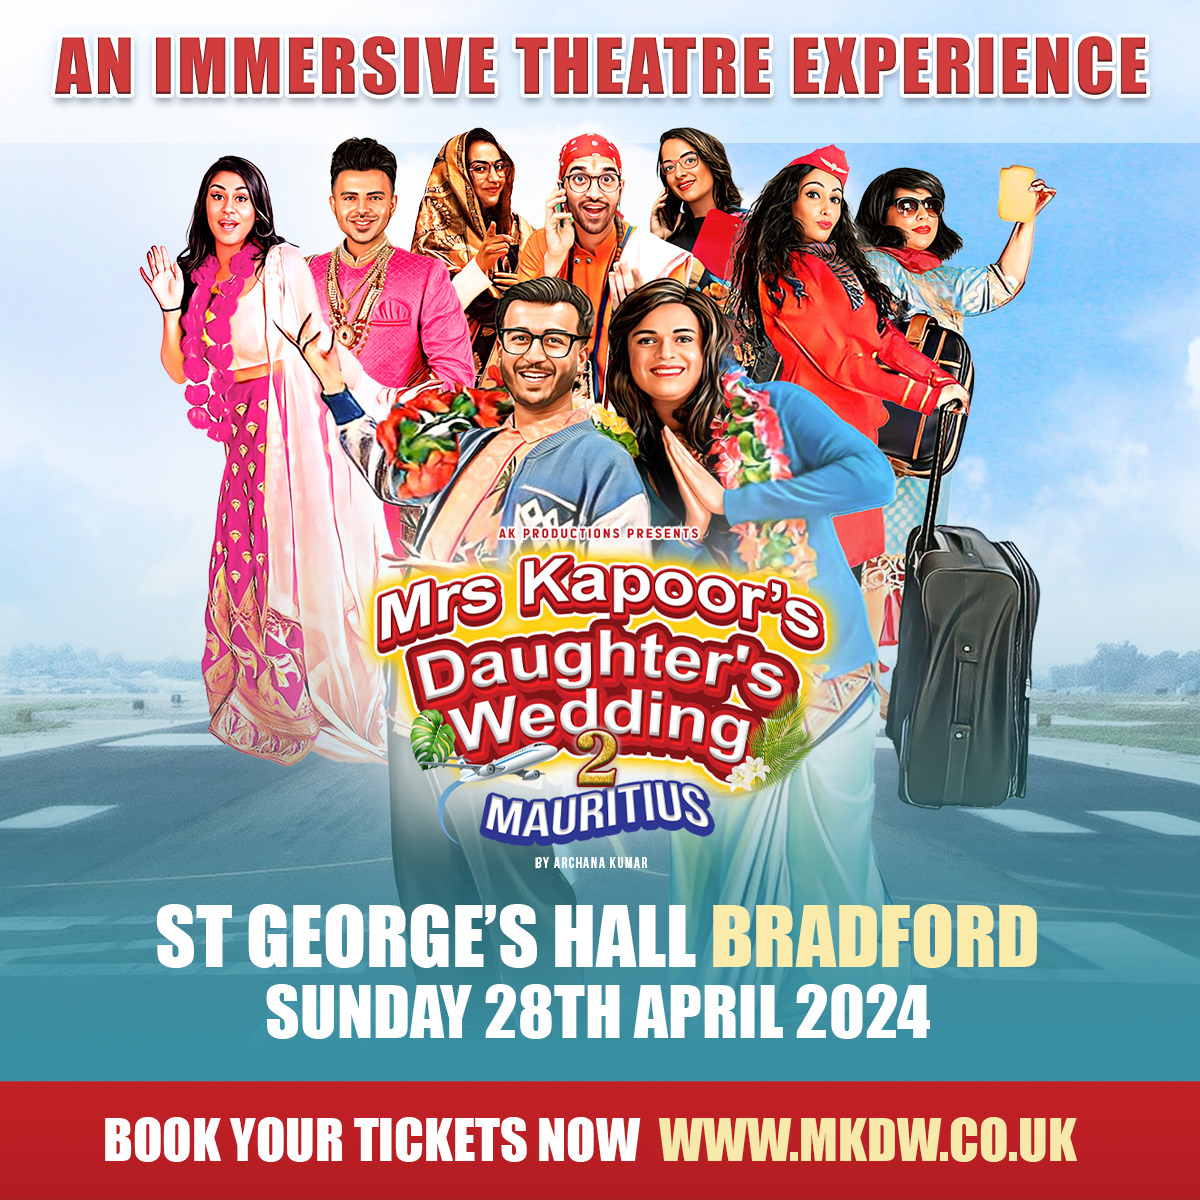 🎉Today marks the last day of our free ticket giveaway to 'Mrs Kapoor’s Daughter’s Wedding 2 Mauritius'! 🎭✨Answer this final question for a chance to win @mkdwproductions Question: Where will the West End show be held? A- Adelphi Theatre B-Alhambra C- Wembley Stadium